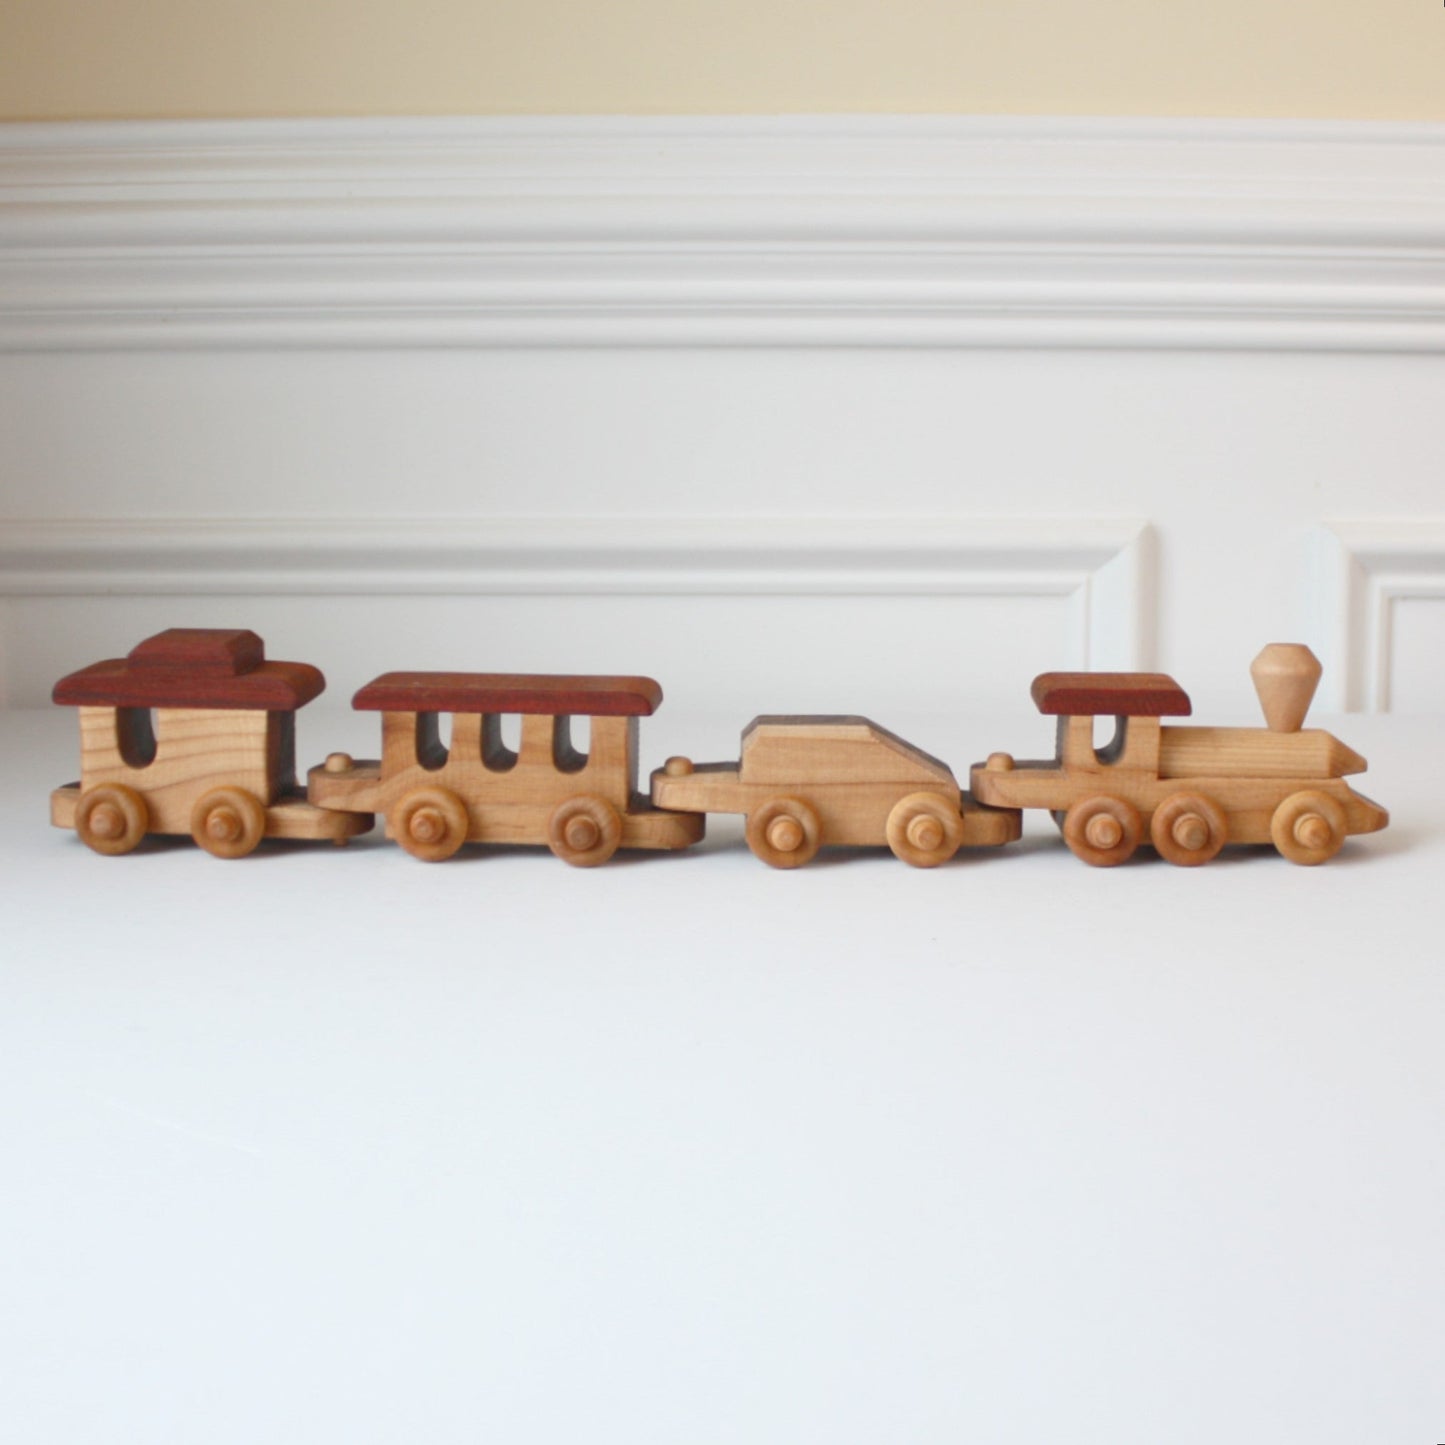 Wooden Toy Train Set - Made in the USA